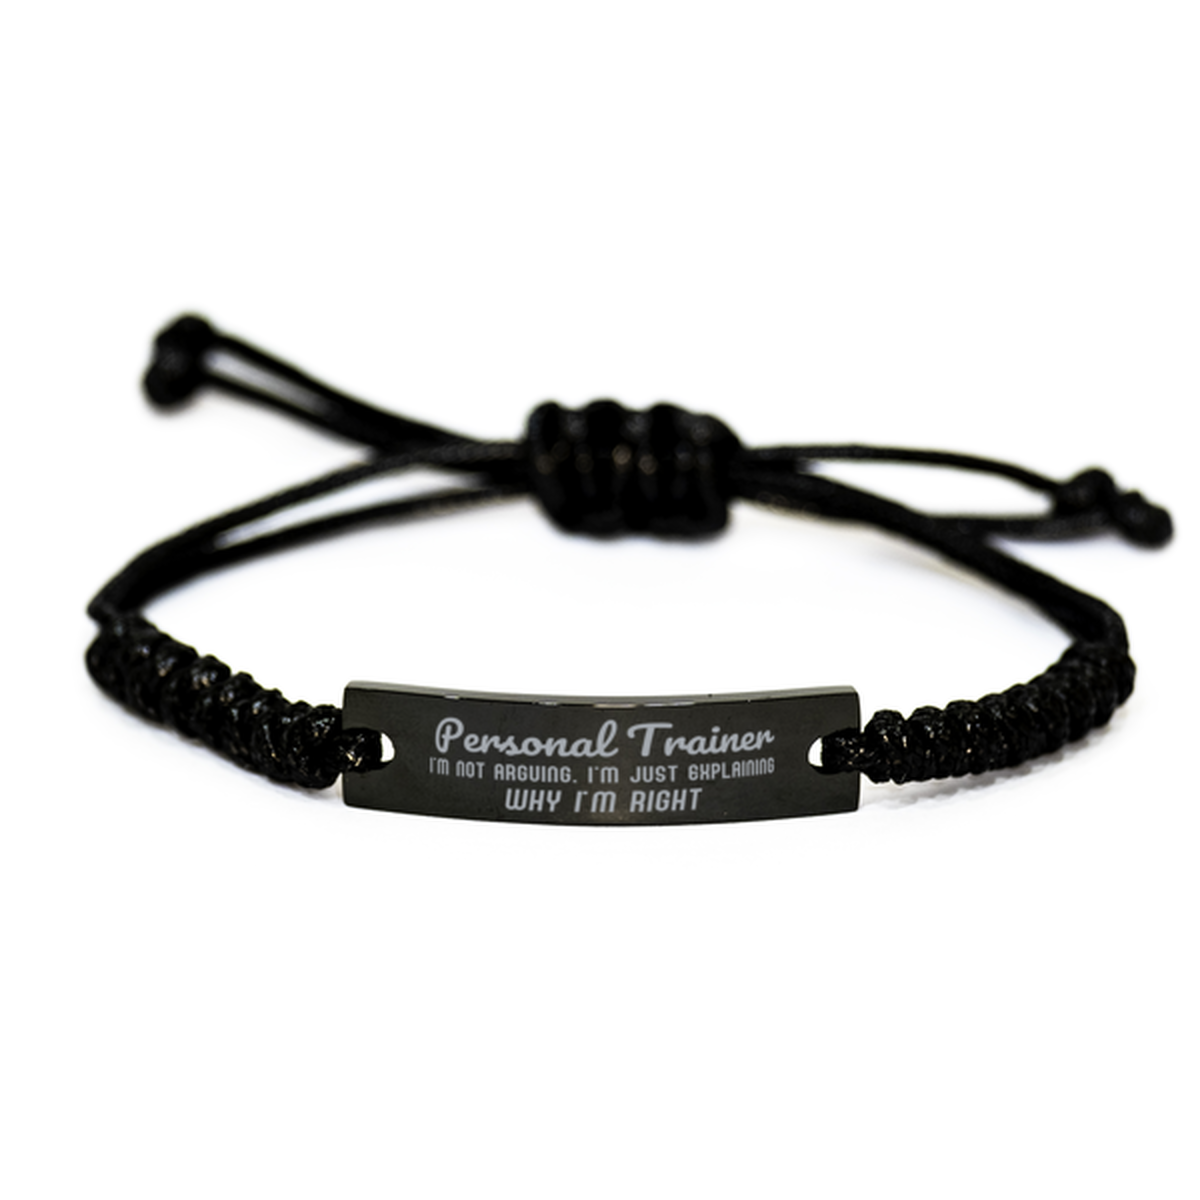 Personal Trainer I'm not Arguing. I'm Just Explaining Why I'm RIGHT Black Rope Bracelet, Funny Saying Quote Personal Trainer Gifts For Personal Trainer Graduation Birthday Christmas Gifts for Men Women Coworker